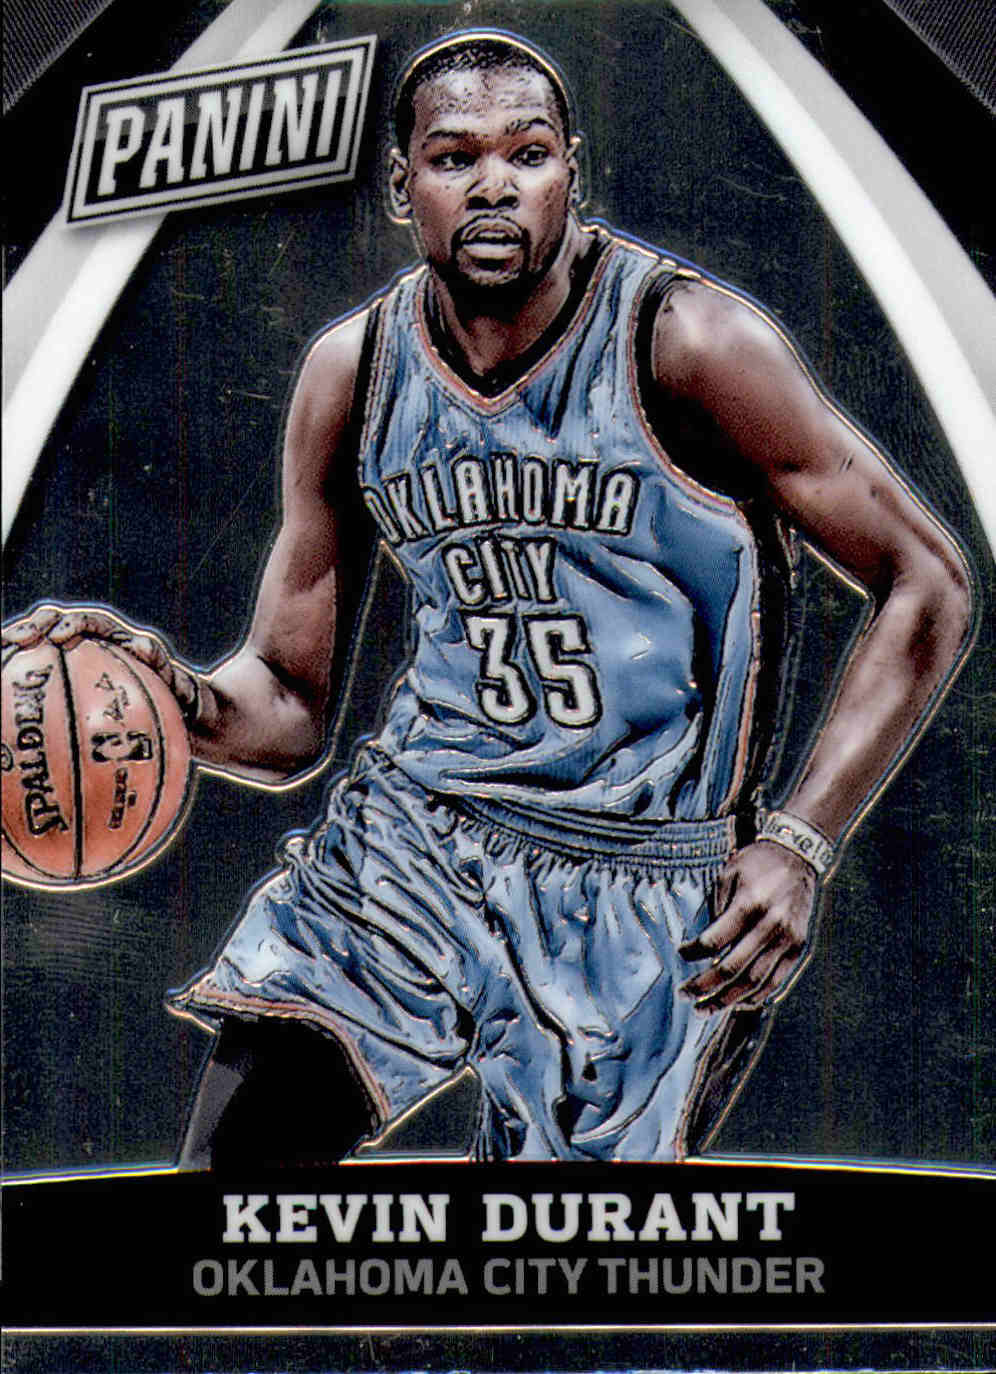 2015 Panini National Convention VIP Party #21 Kevin Durant BK